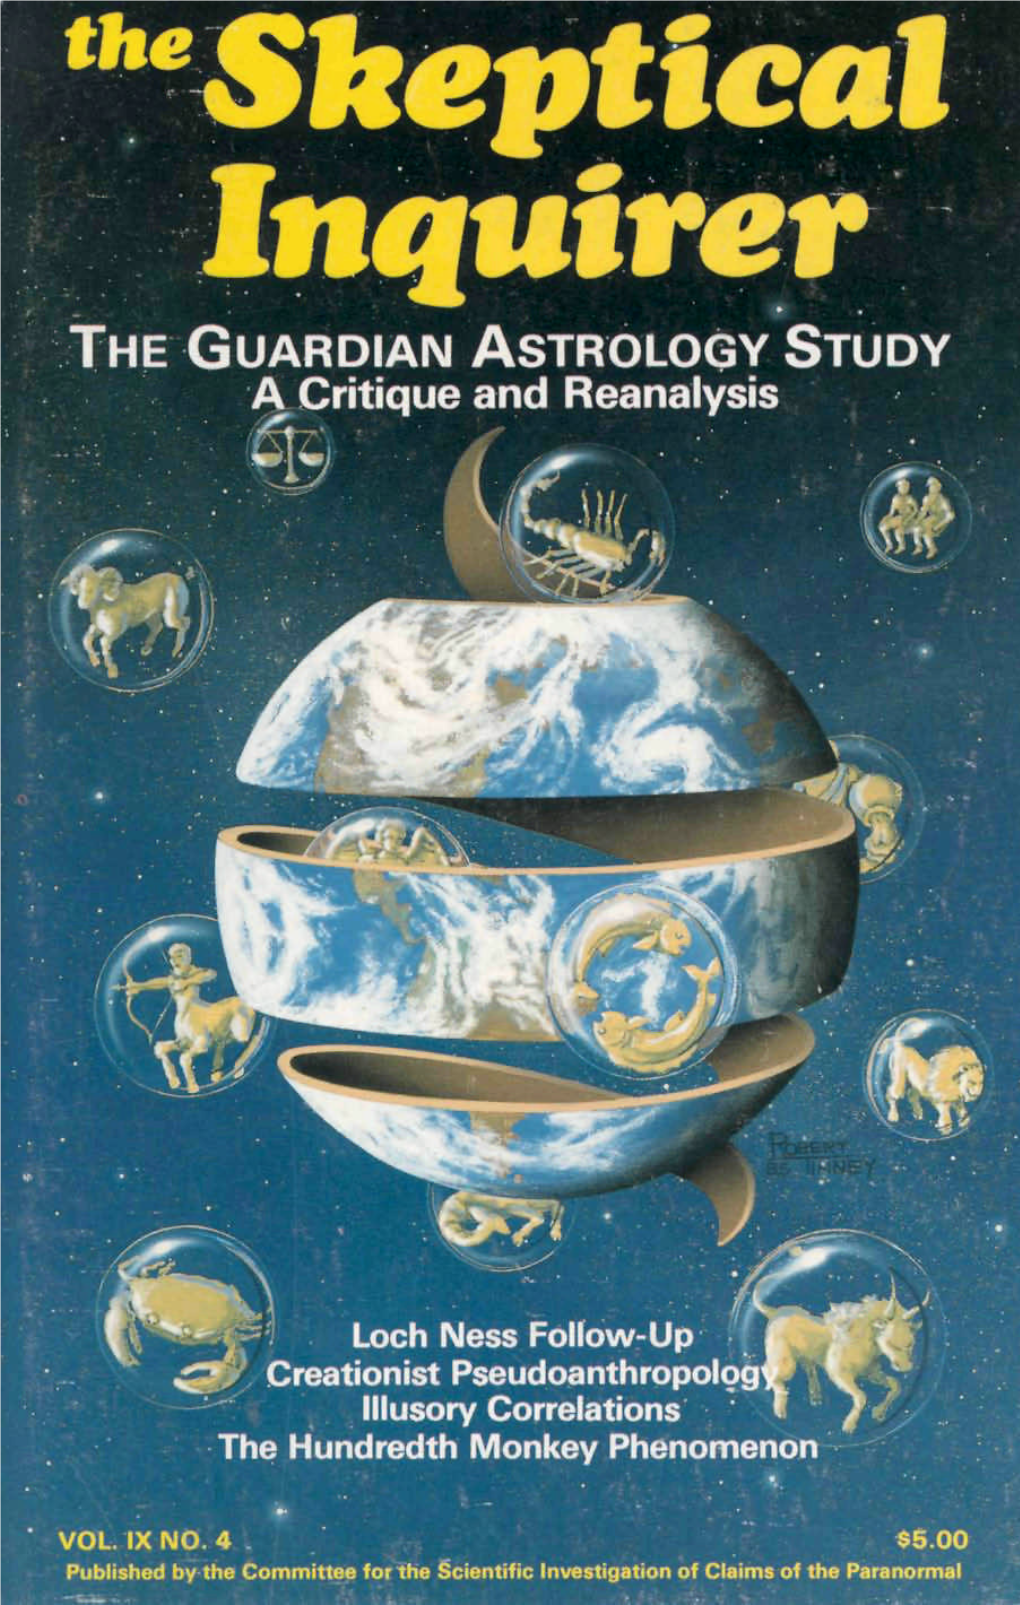 The Skeptical Inquirer the GUARDIAN ASTROLOGY STUDY a Critique and Reanalysis